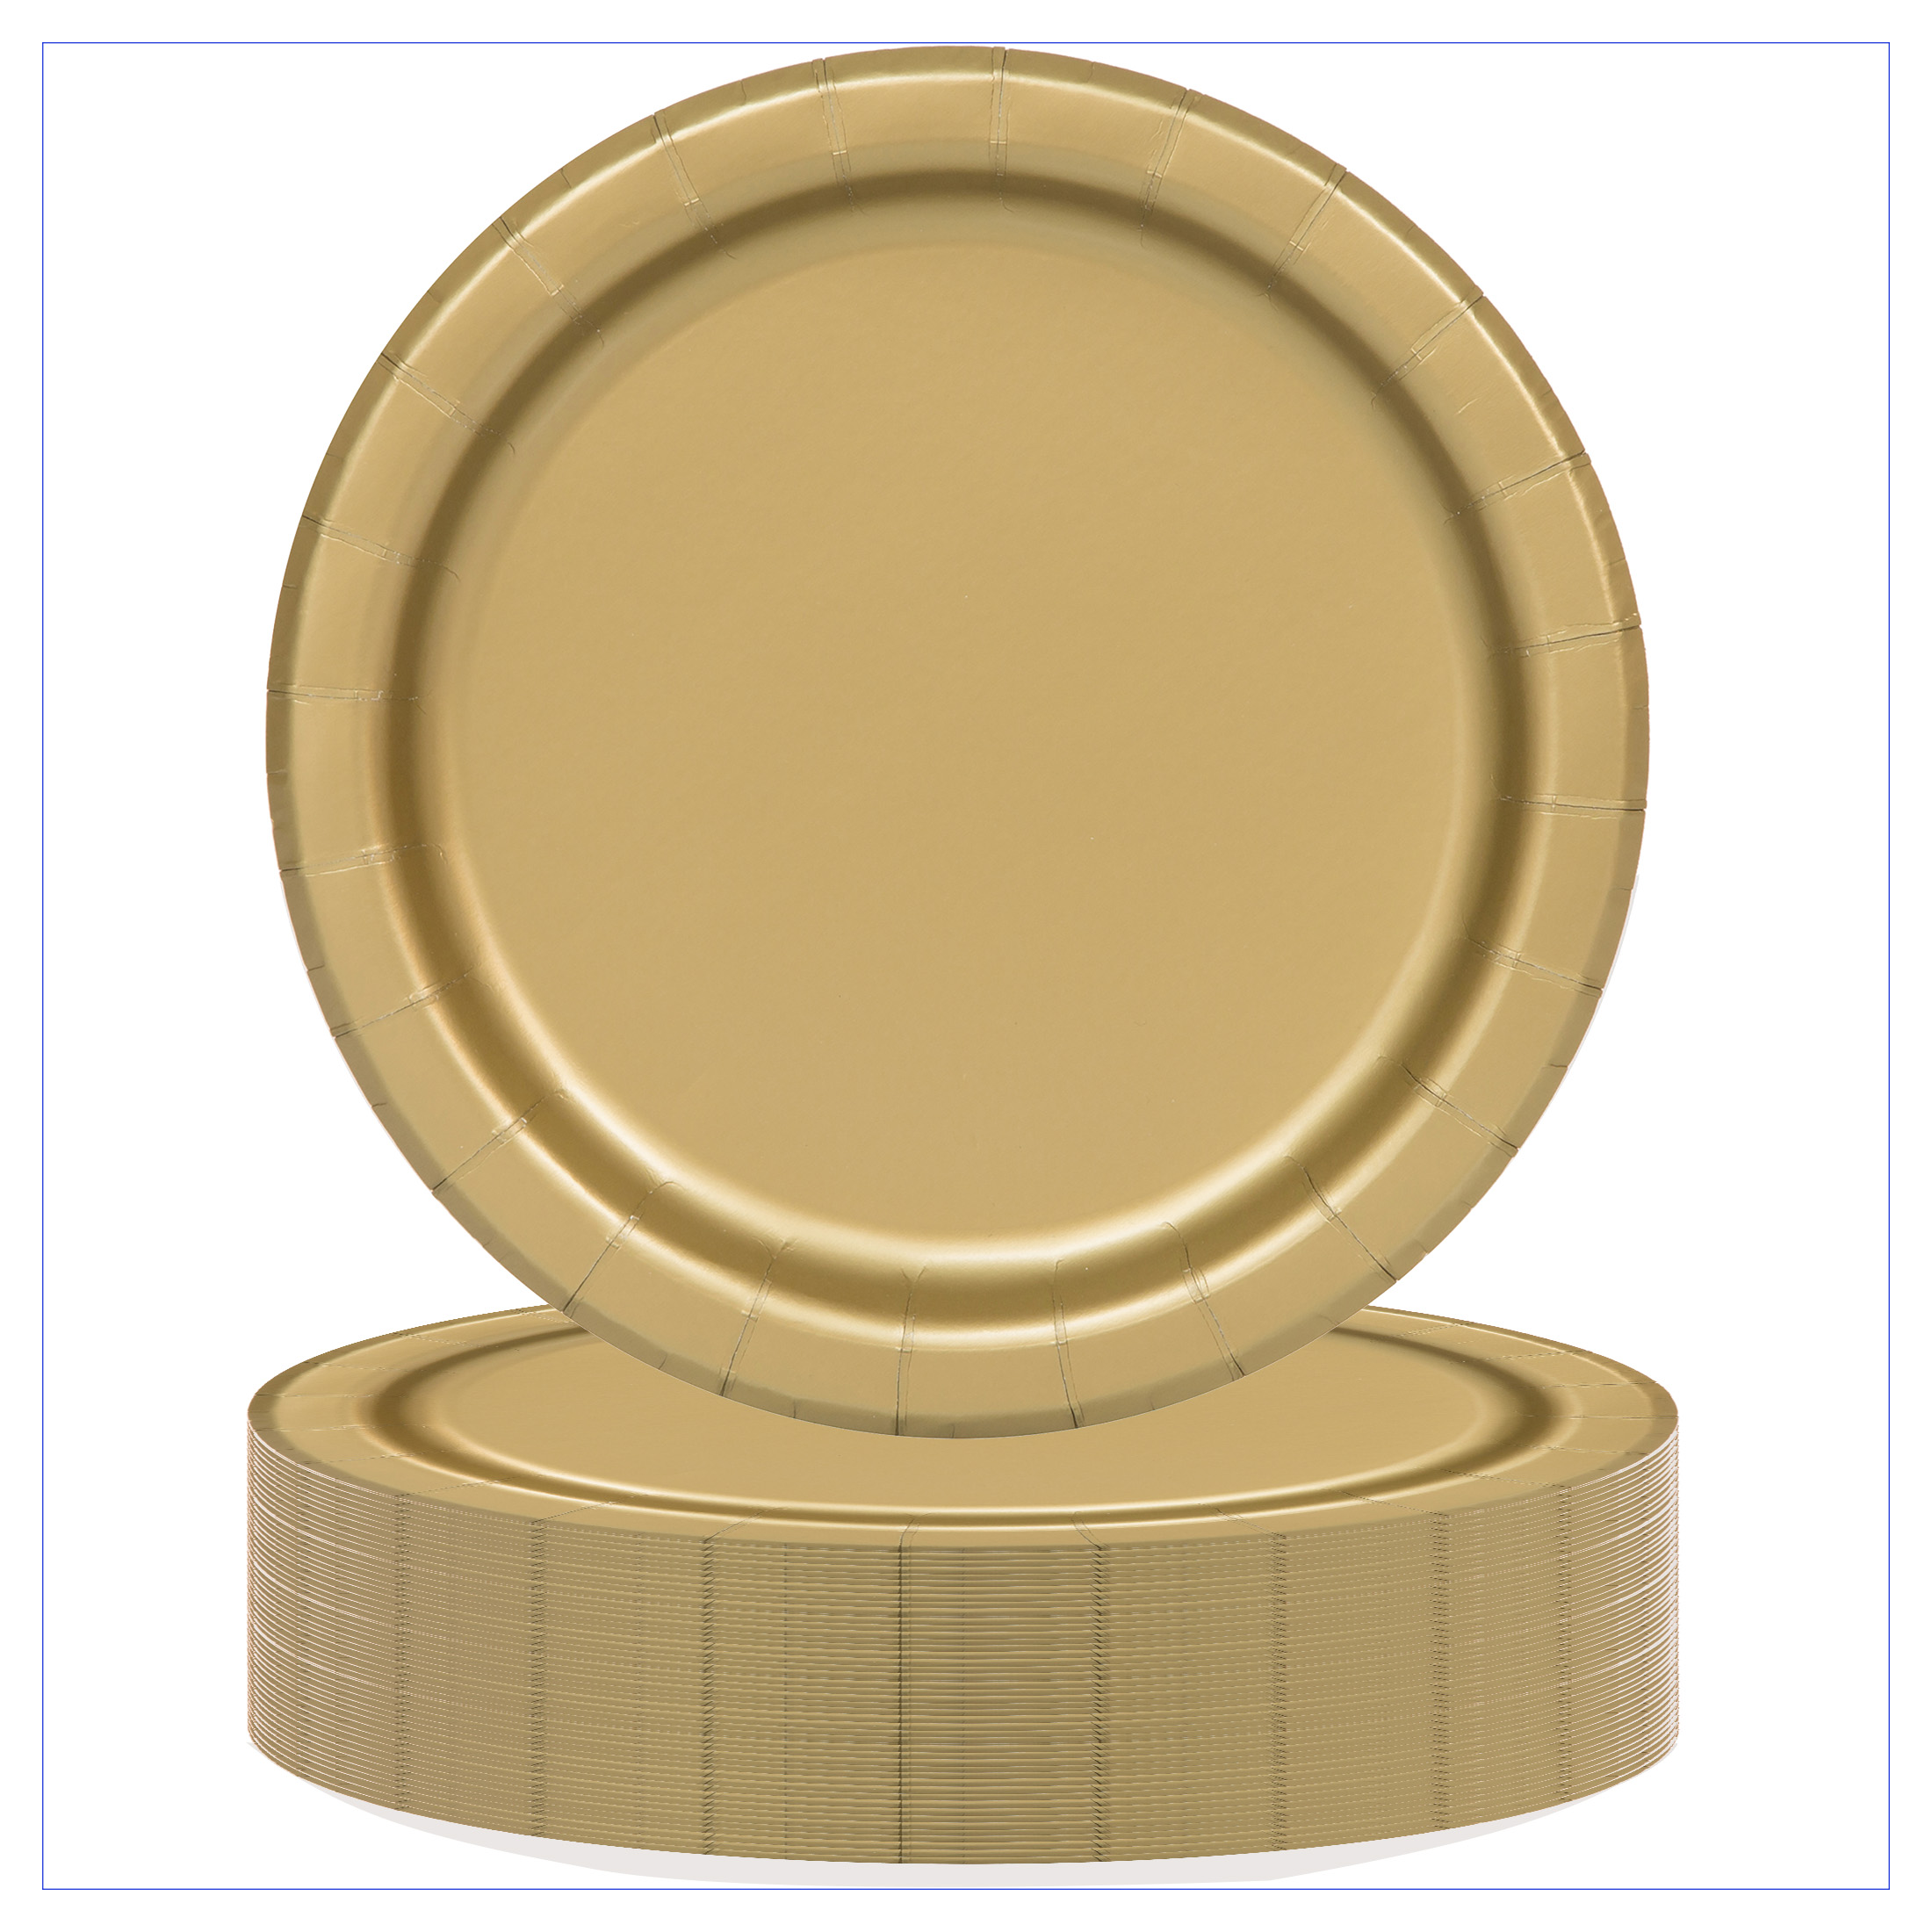 Way to Celebrate! Gold Paper Dinner Plates, 9in, 55ct - image 2 of 6